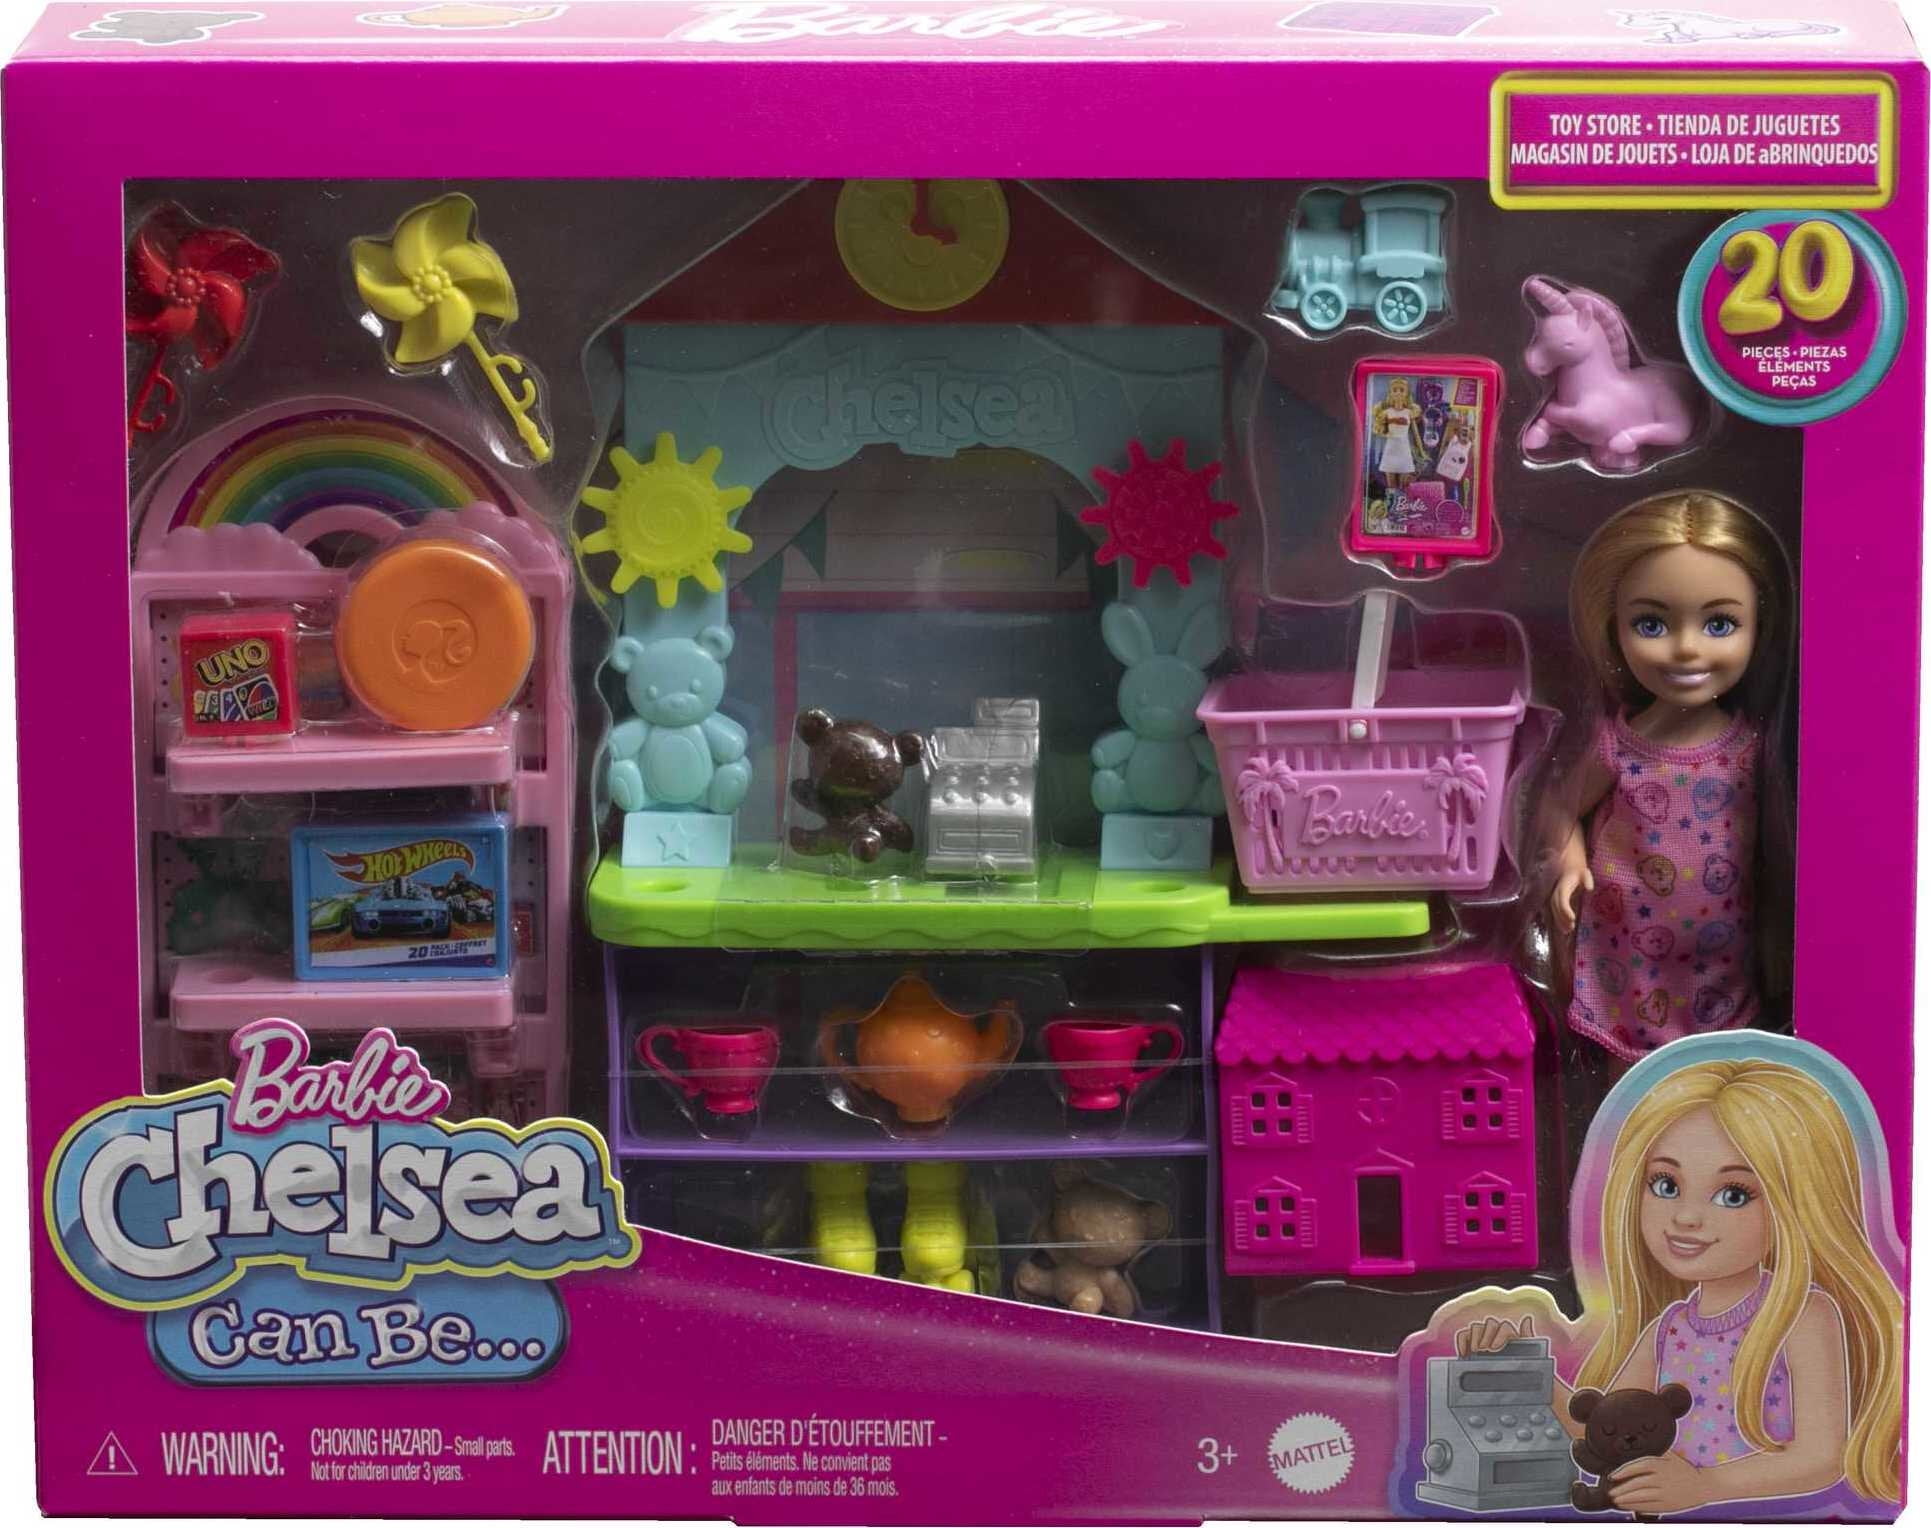 BARBIE CHELSEA WITH CAR - THE TOY STORE